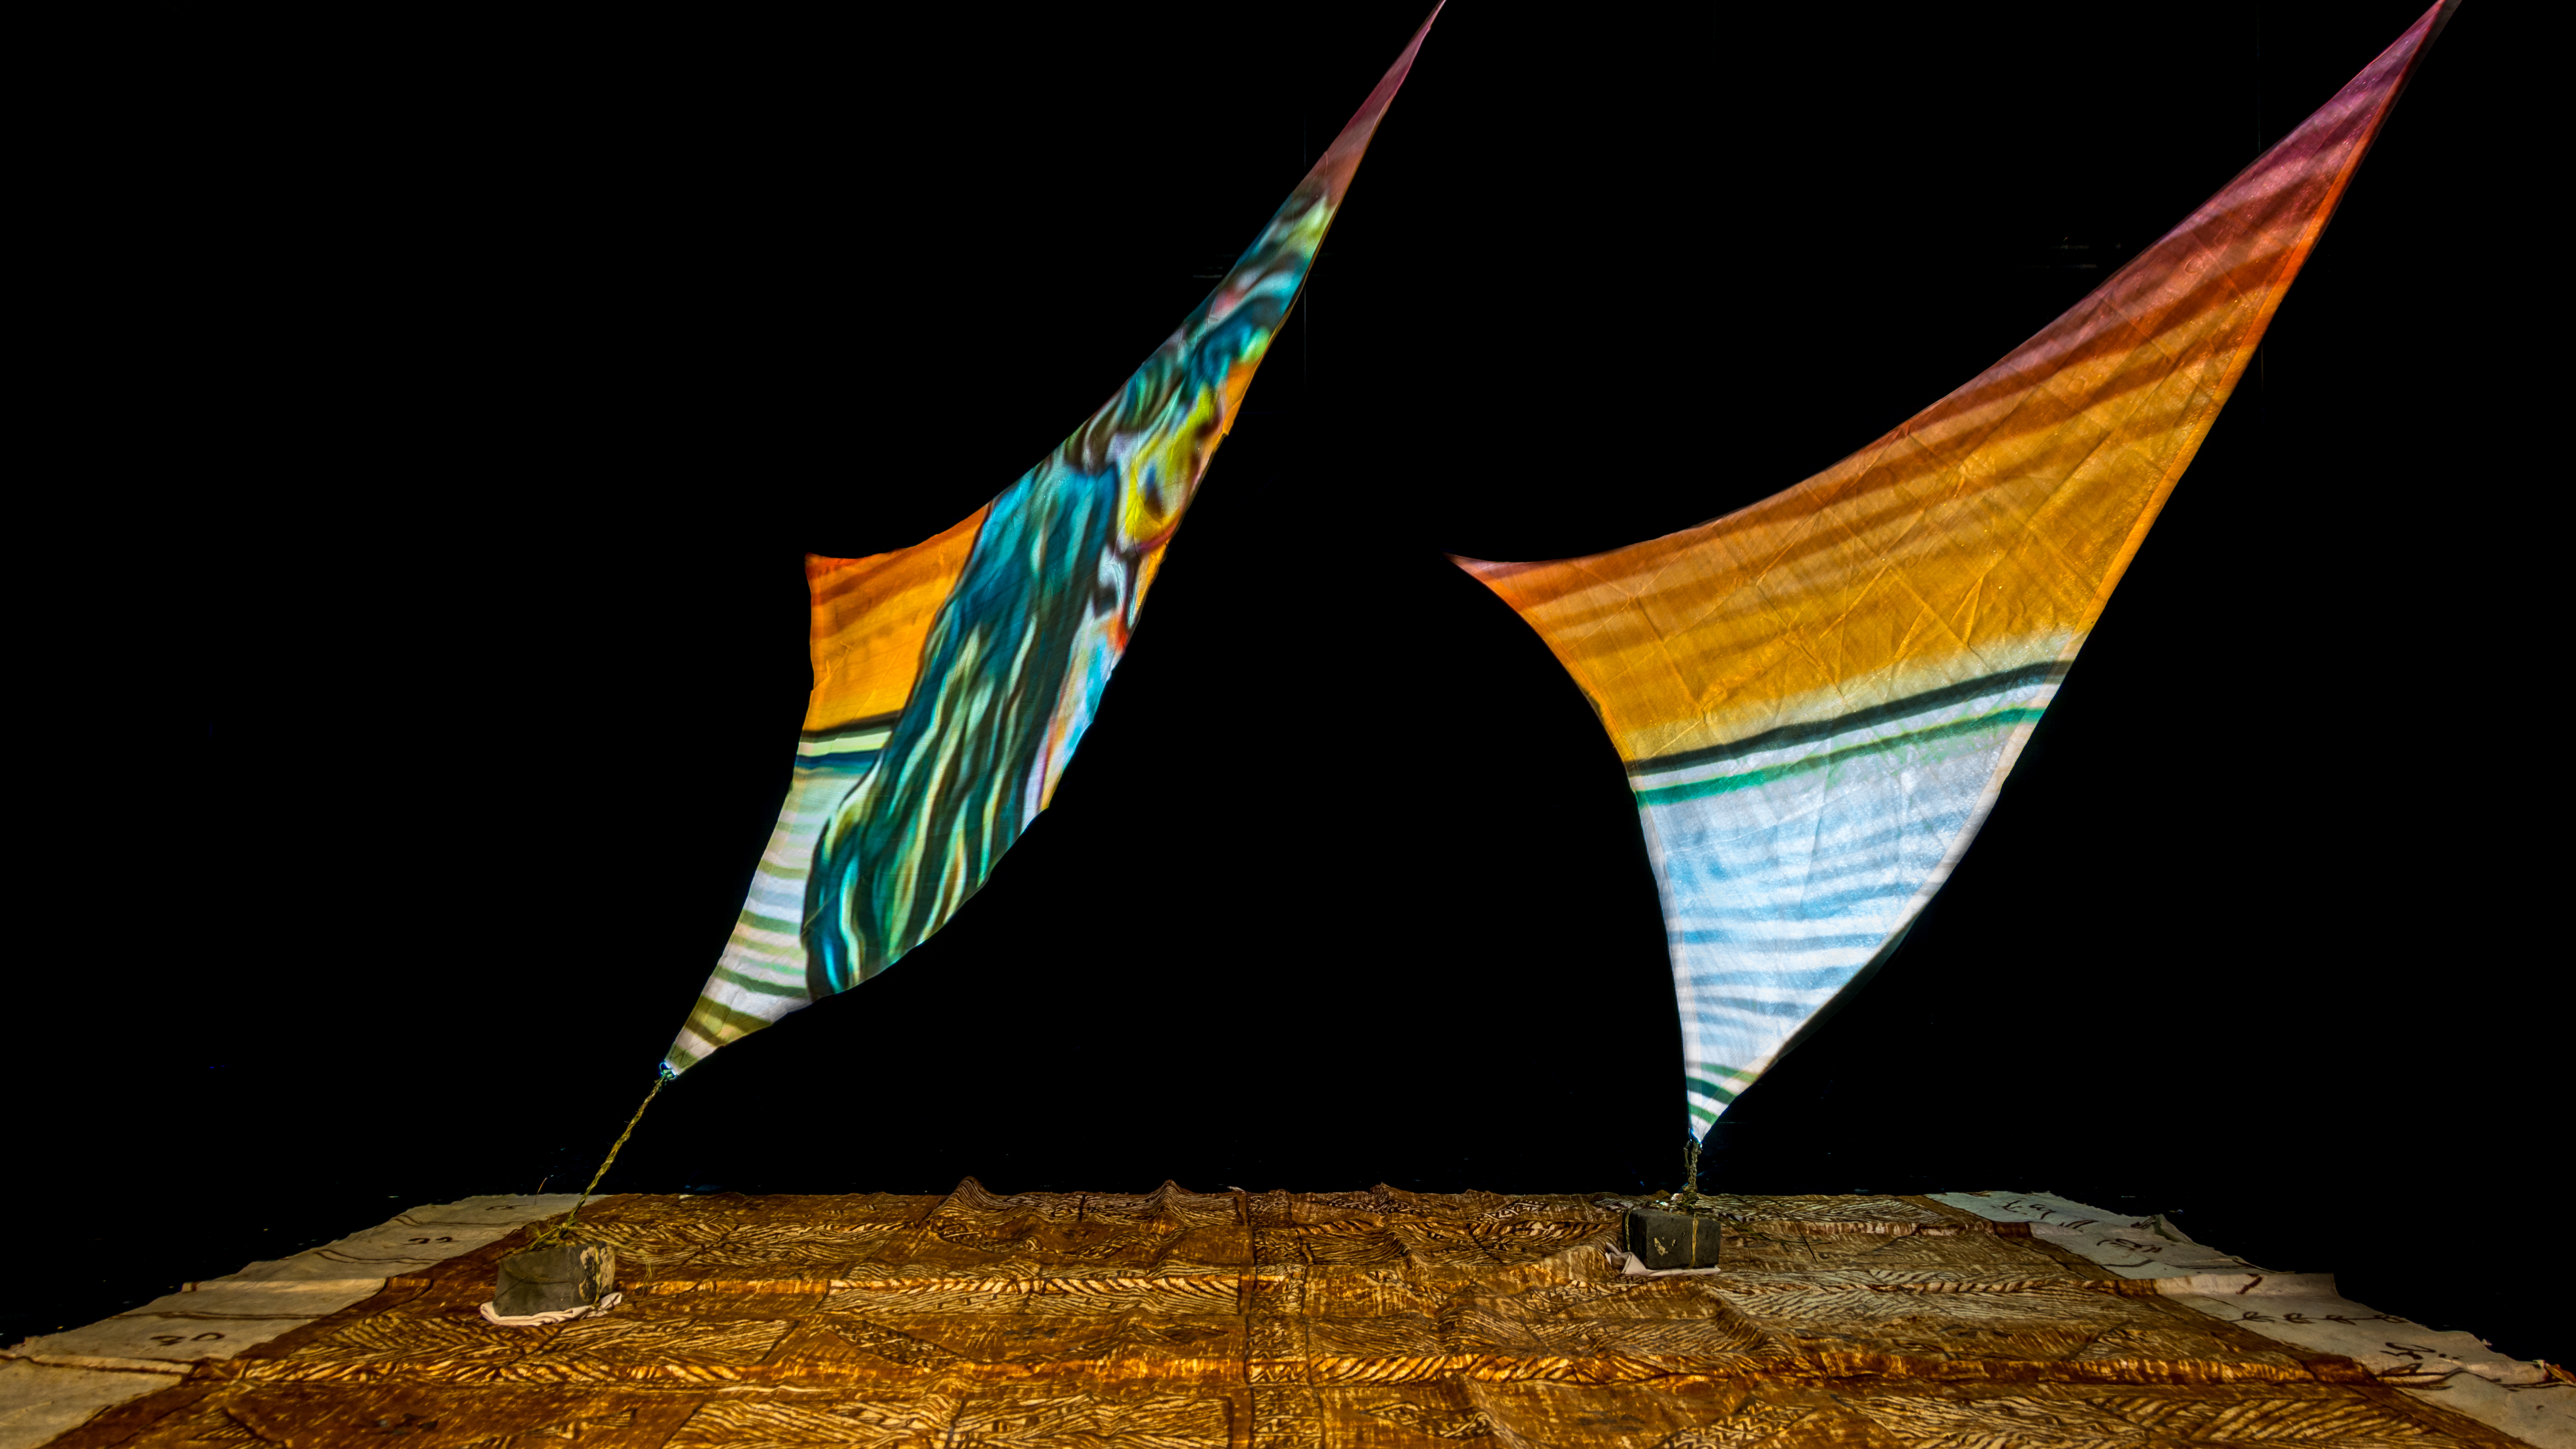 Projections onto rā sails installed with tapa underneath